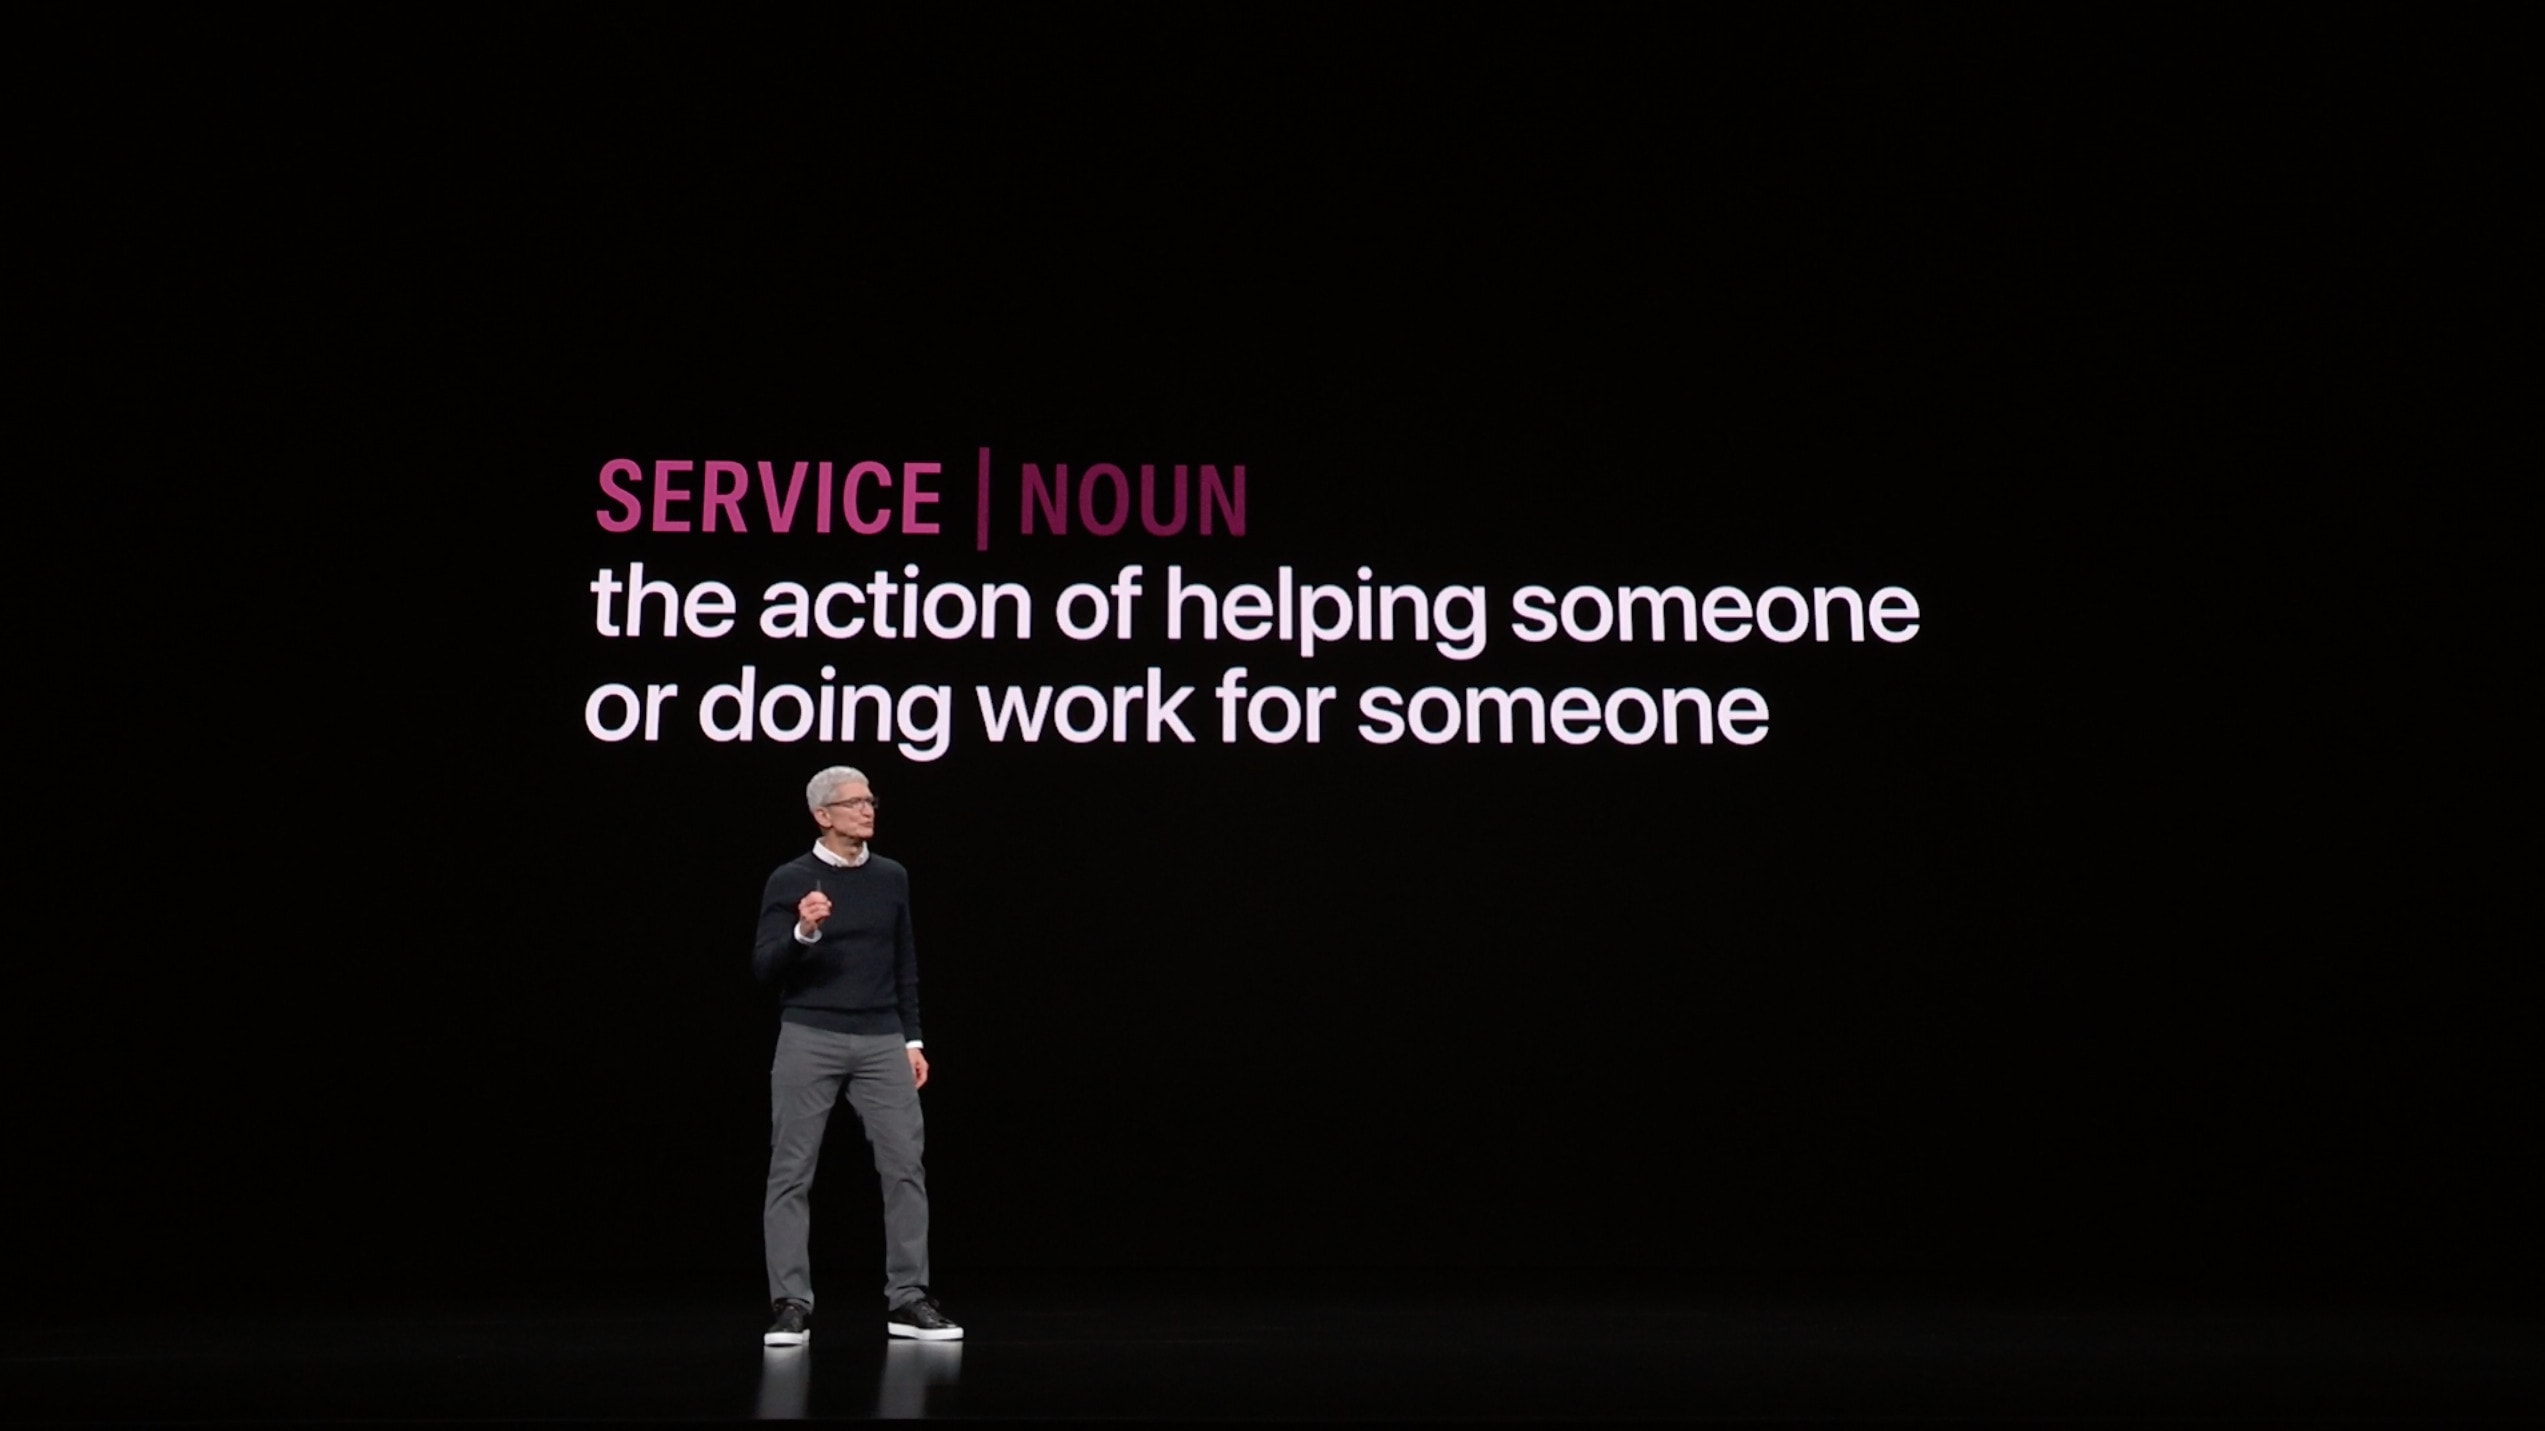 Tim Cook shows off the latest Apple services.